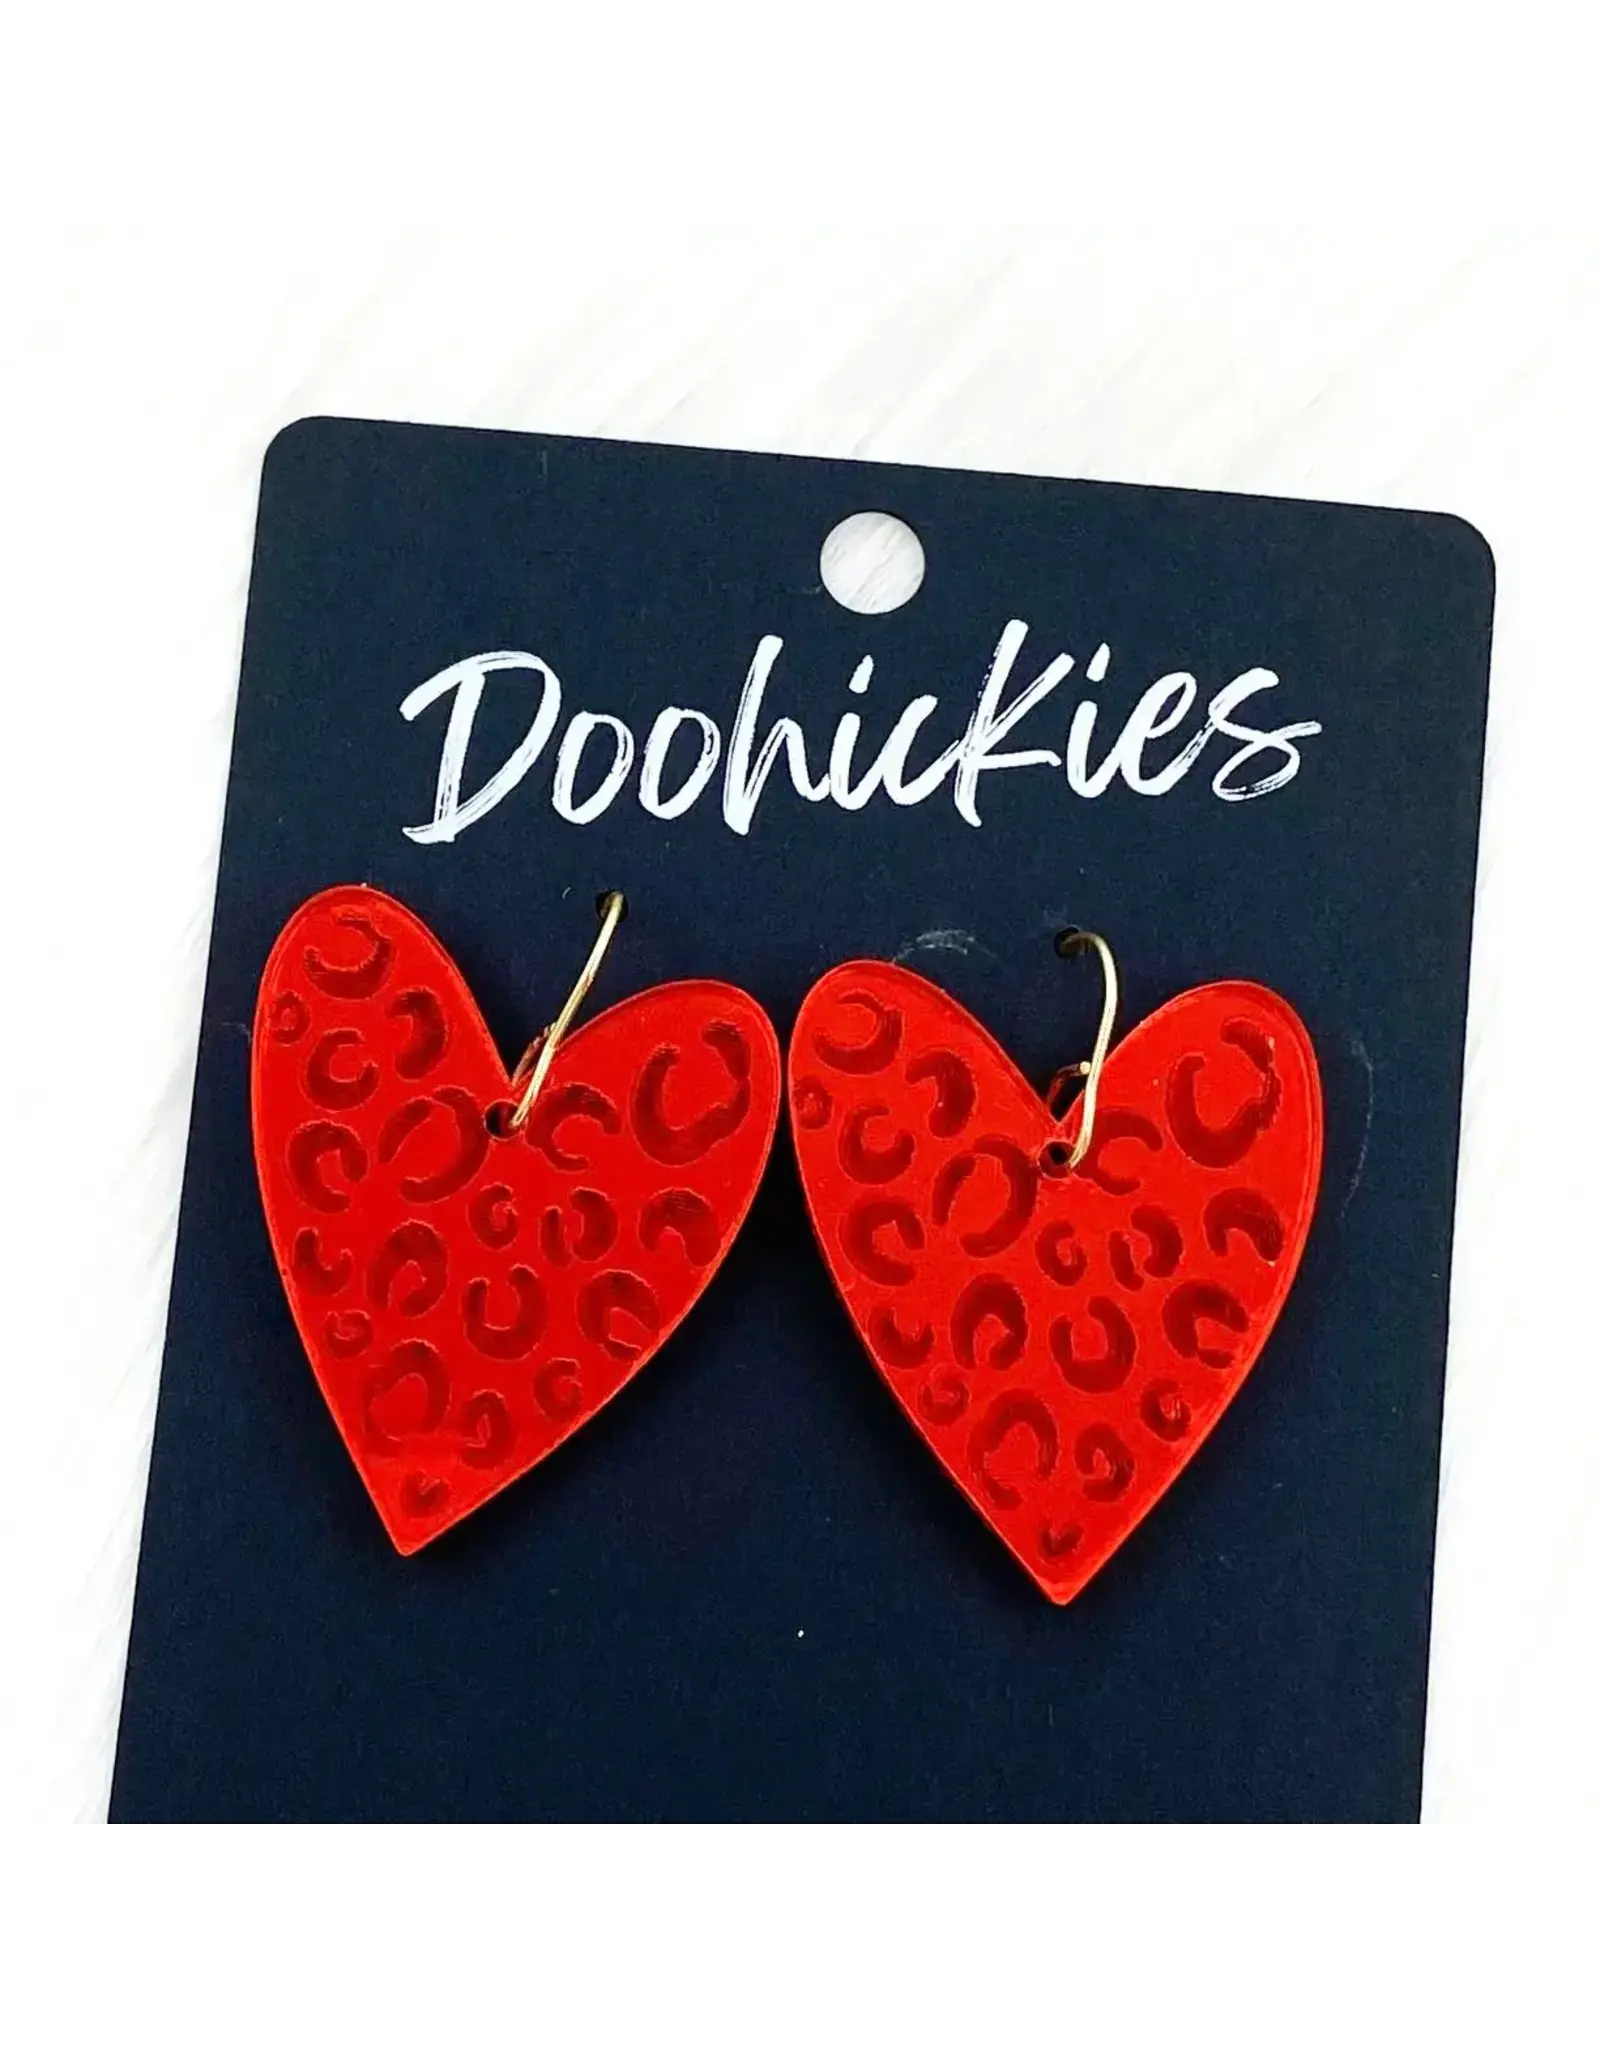 Doohickies/So. Charm Trade Leopard Mirror Hearts Earrings - Red